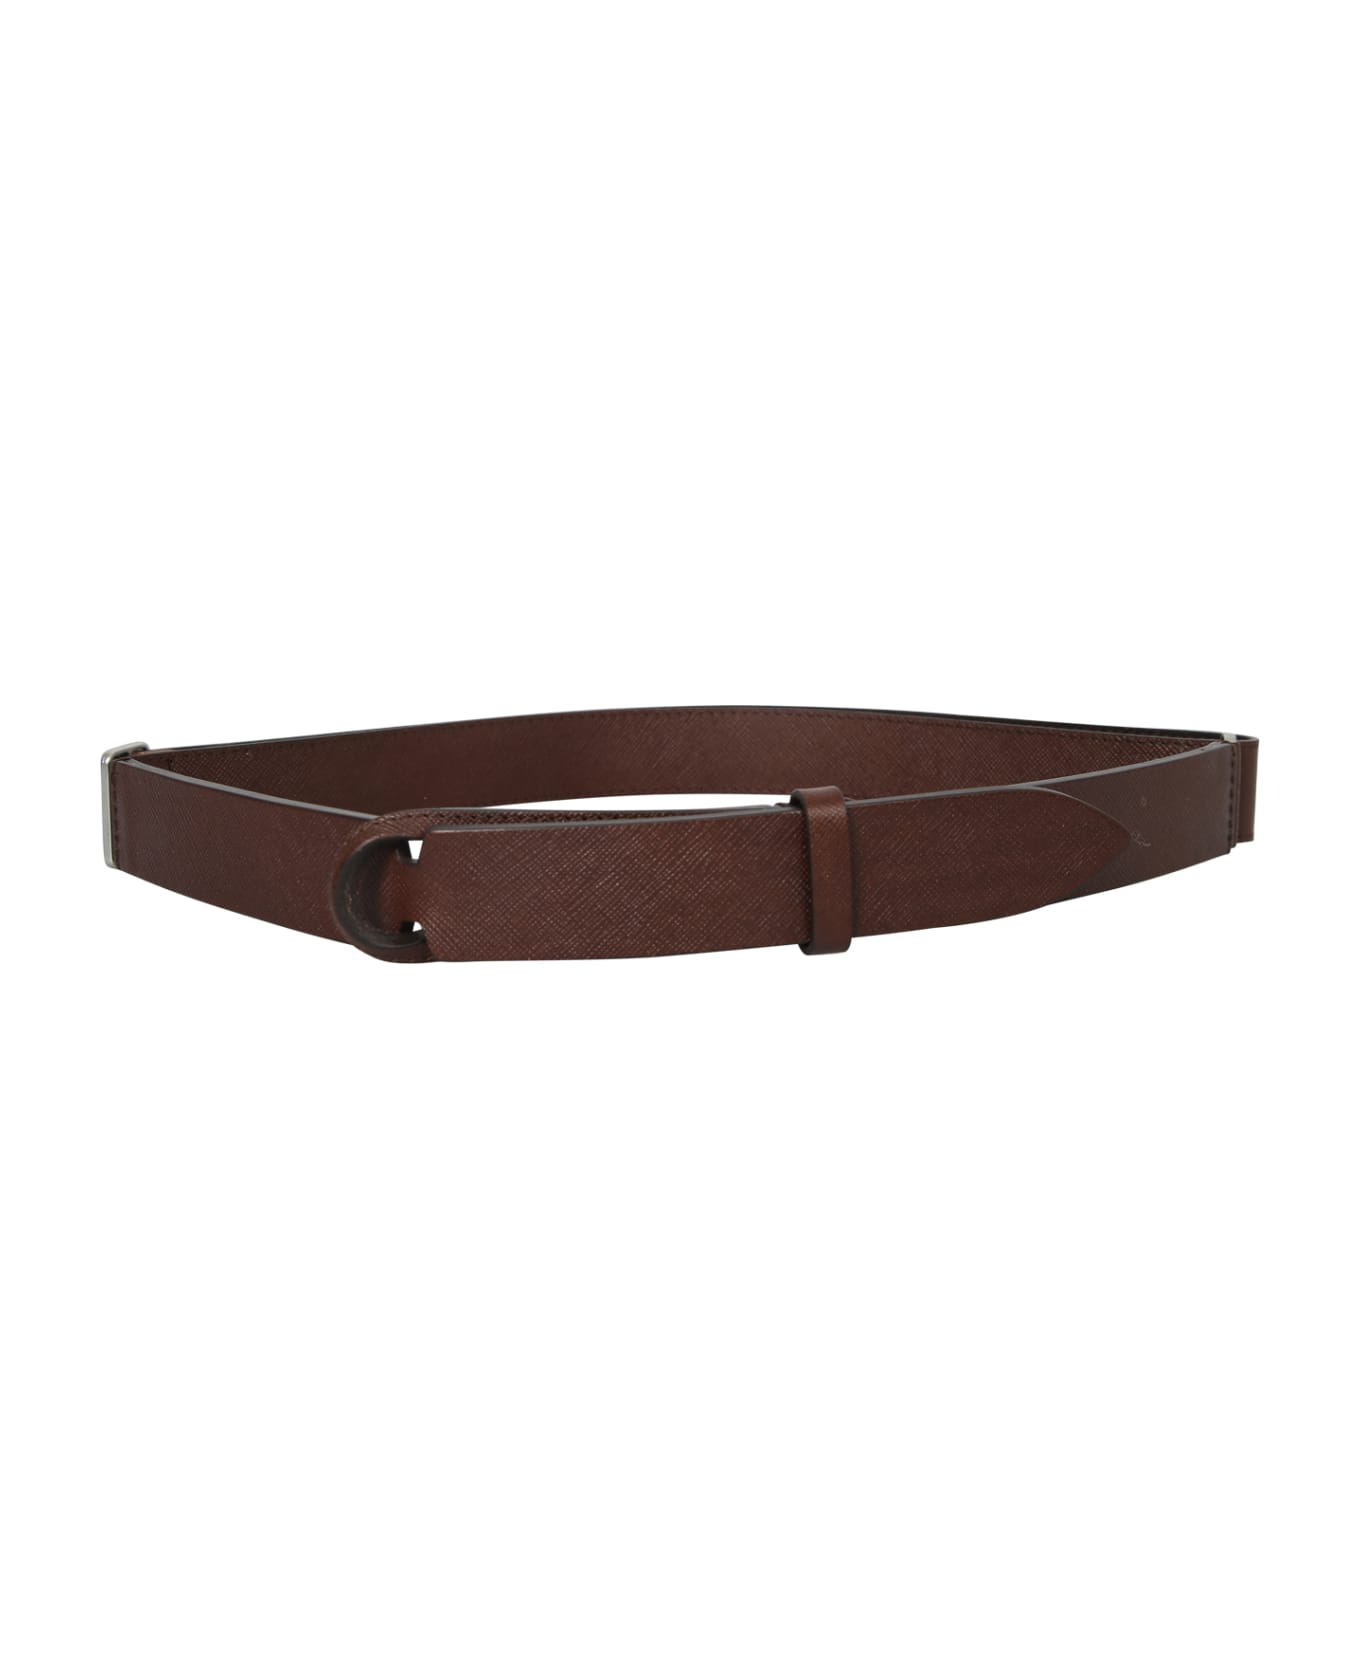 Orciani No Buckle Belt - Brown